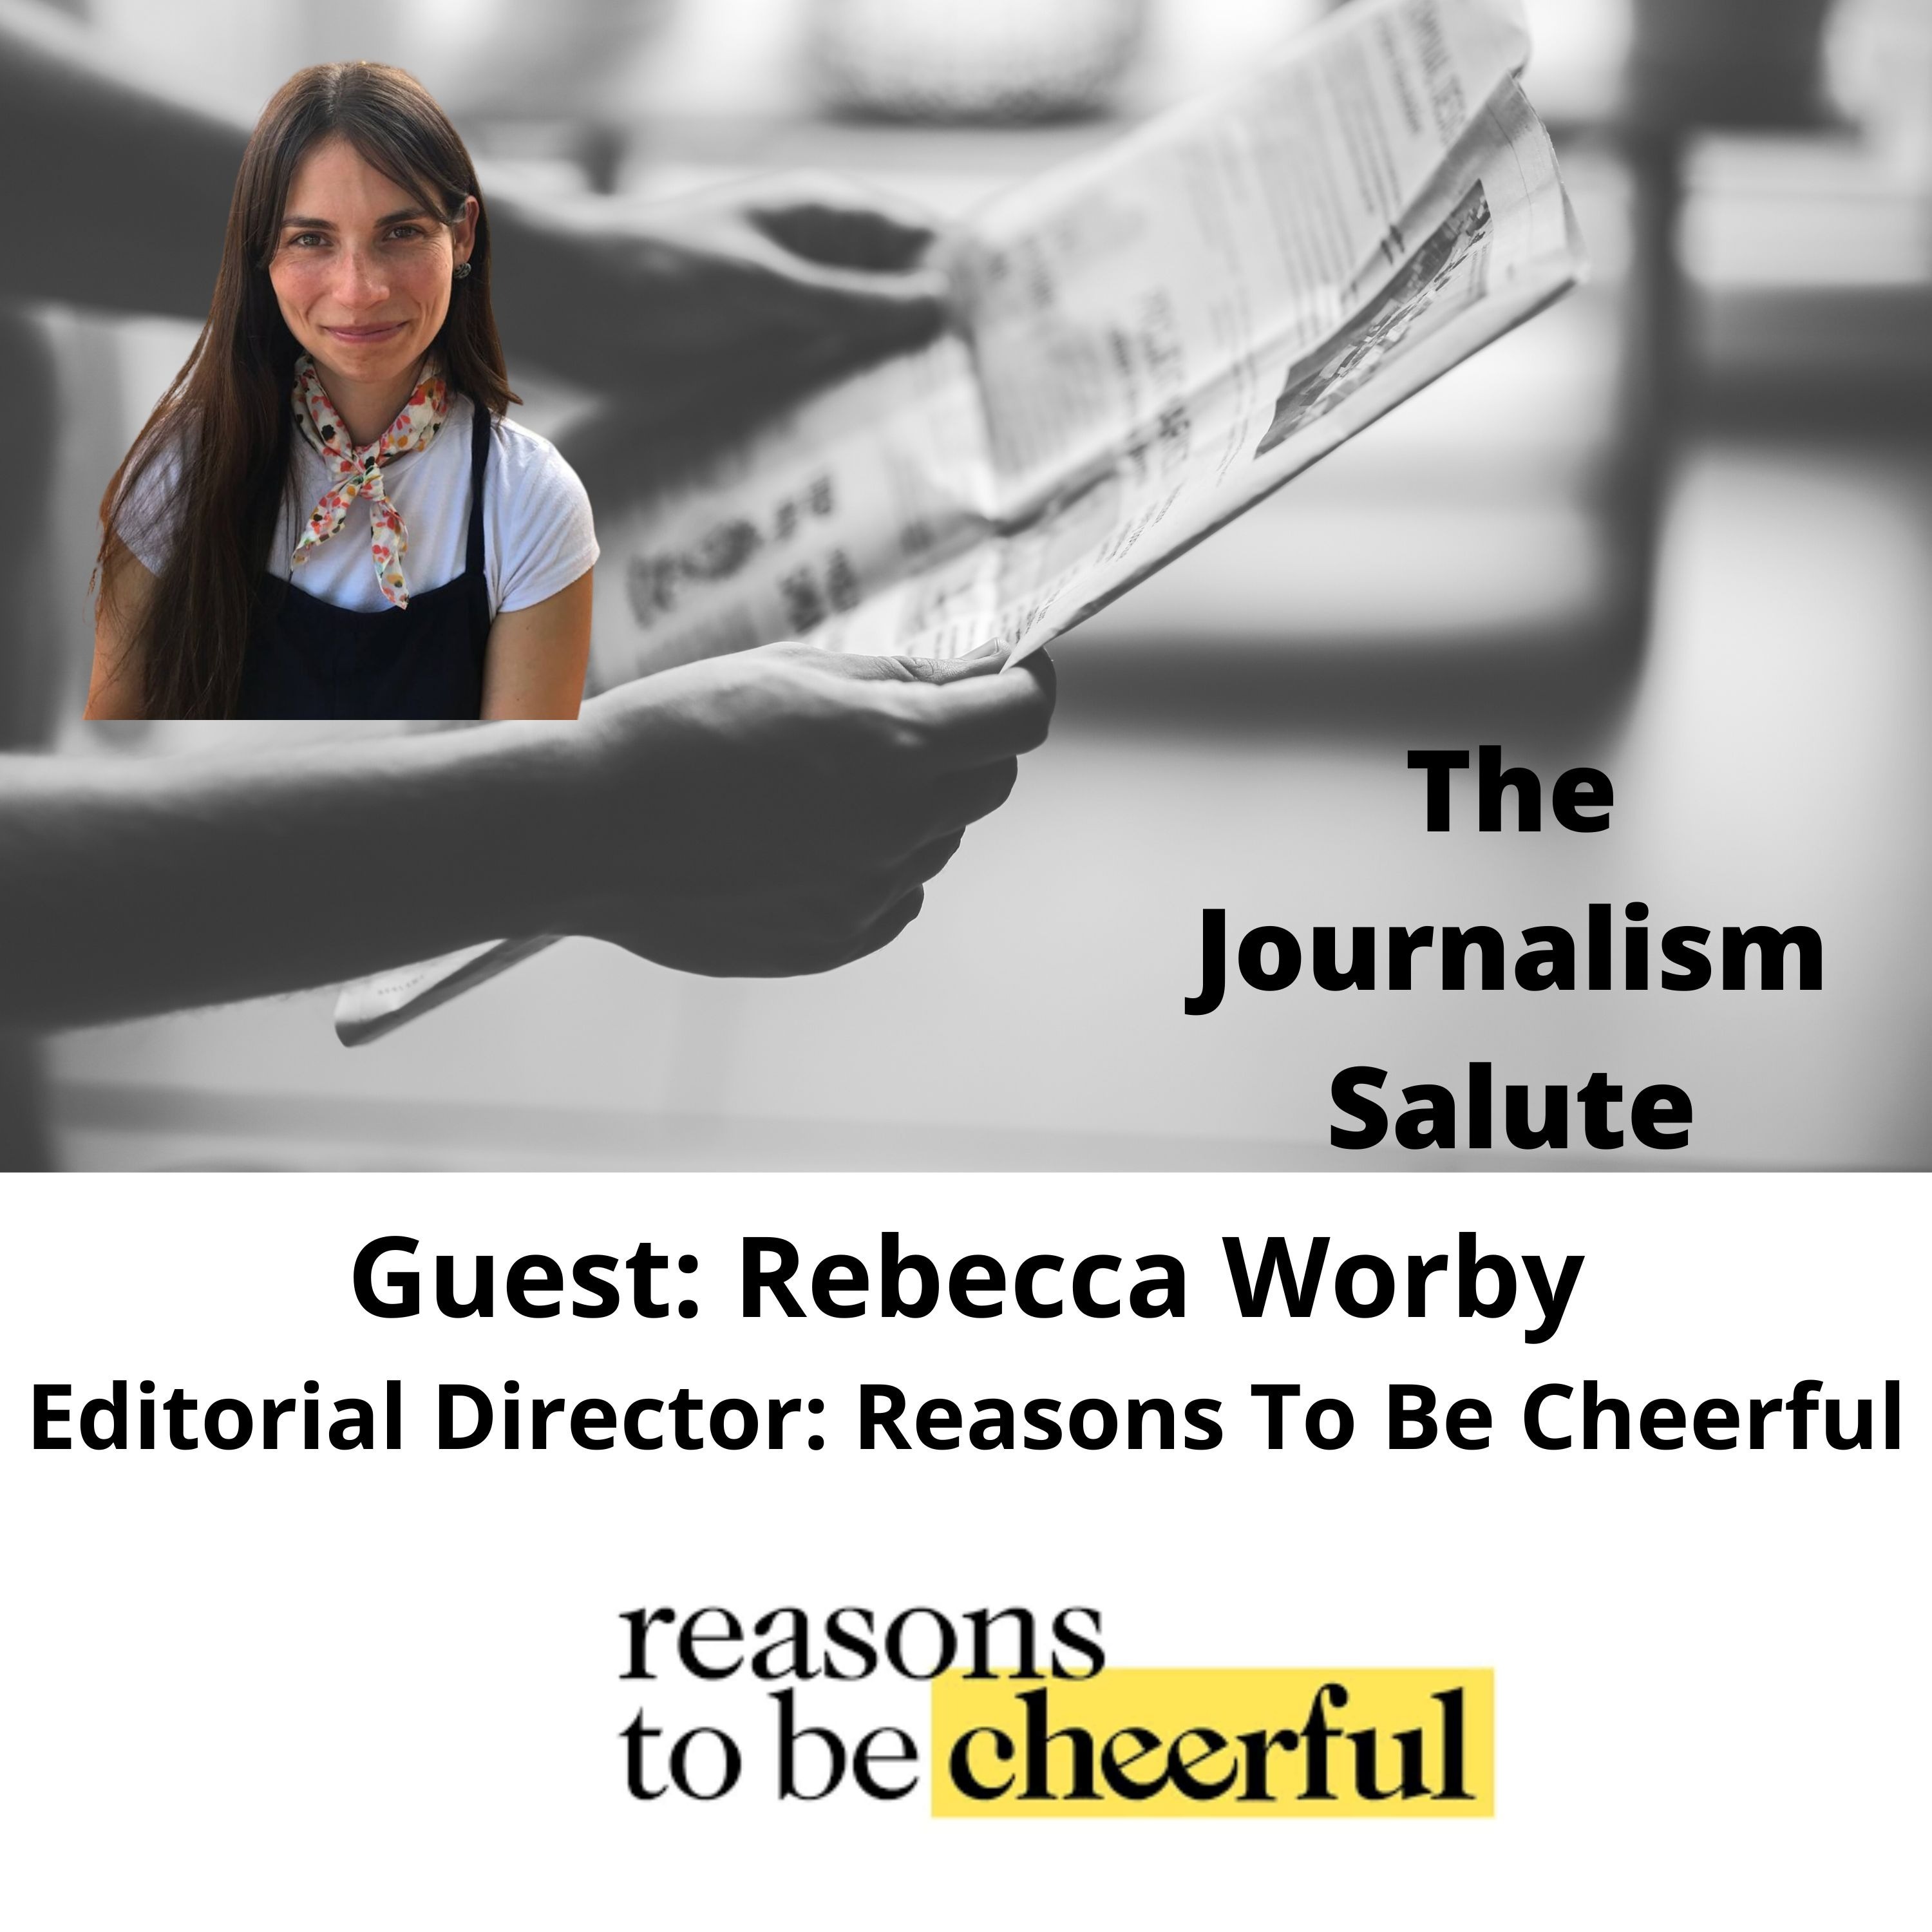 Rebecca Worby, Editorial Director: Reasons To Be Cheerful